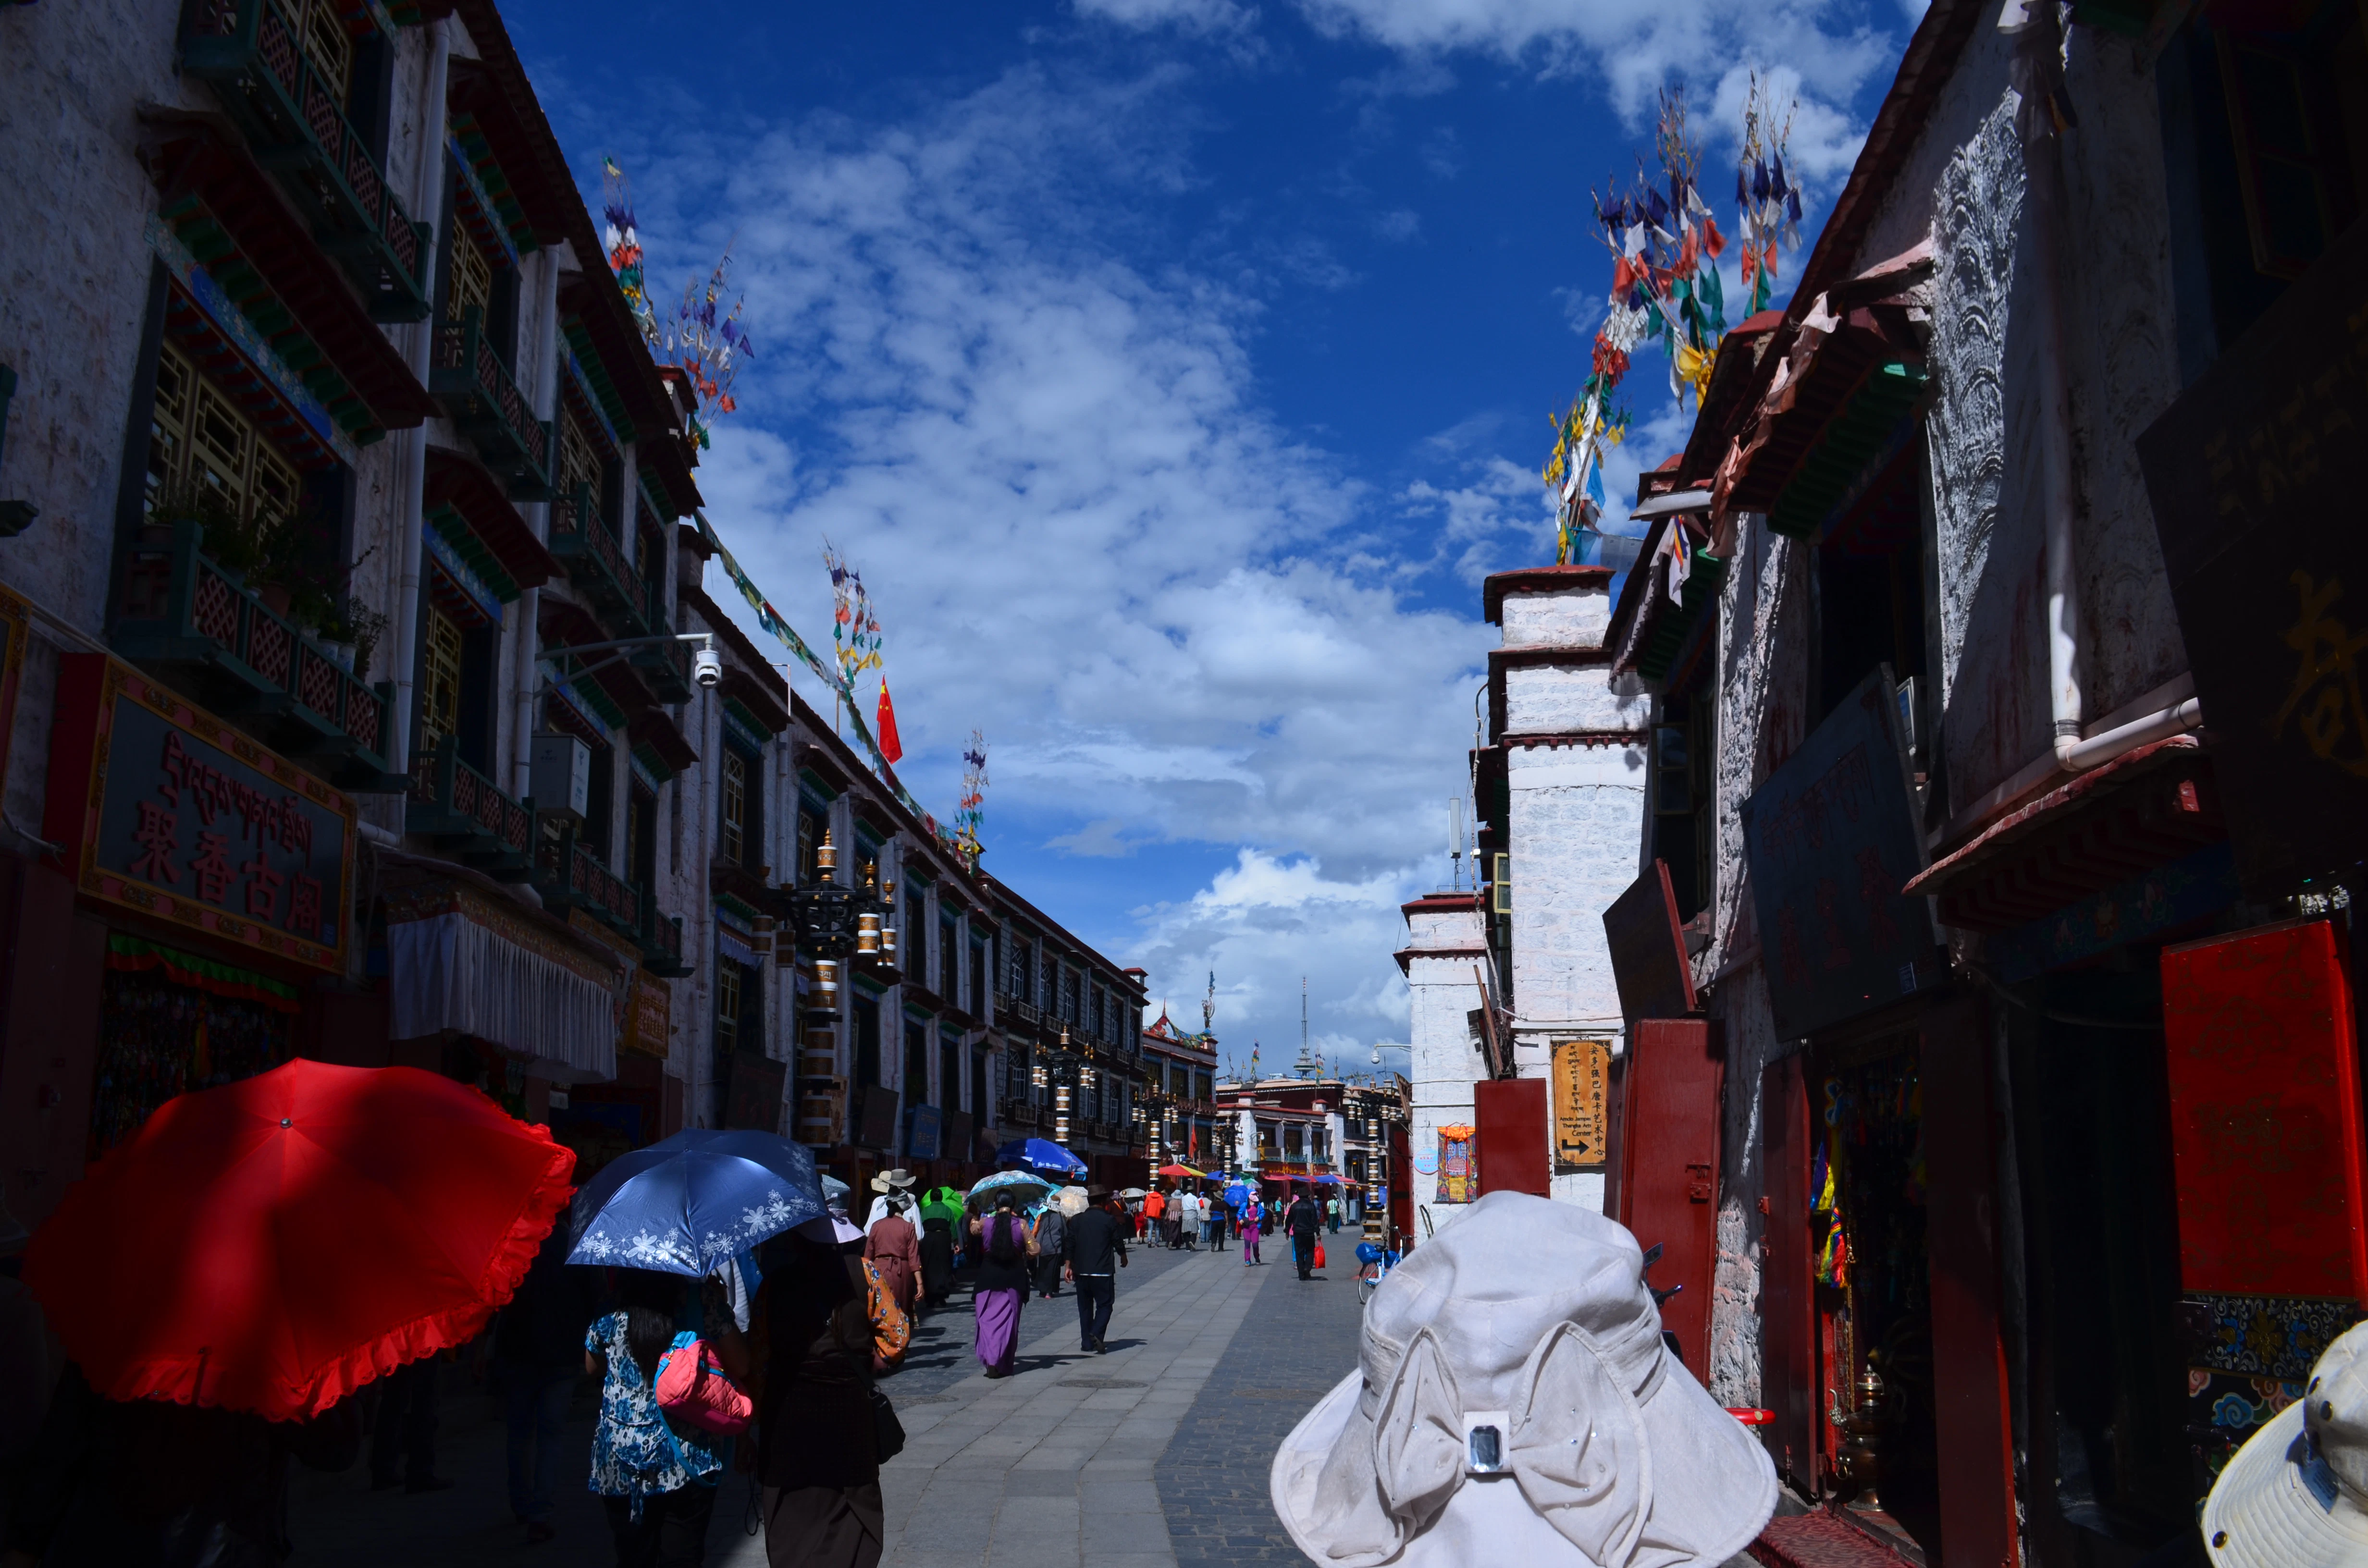 Afternoon on Barkhor Street in Lhasa,Tibet